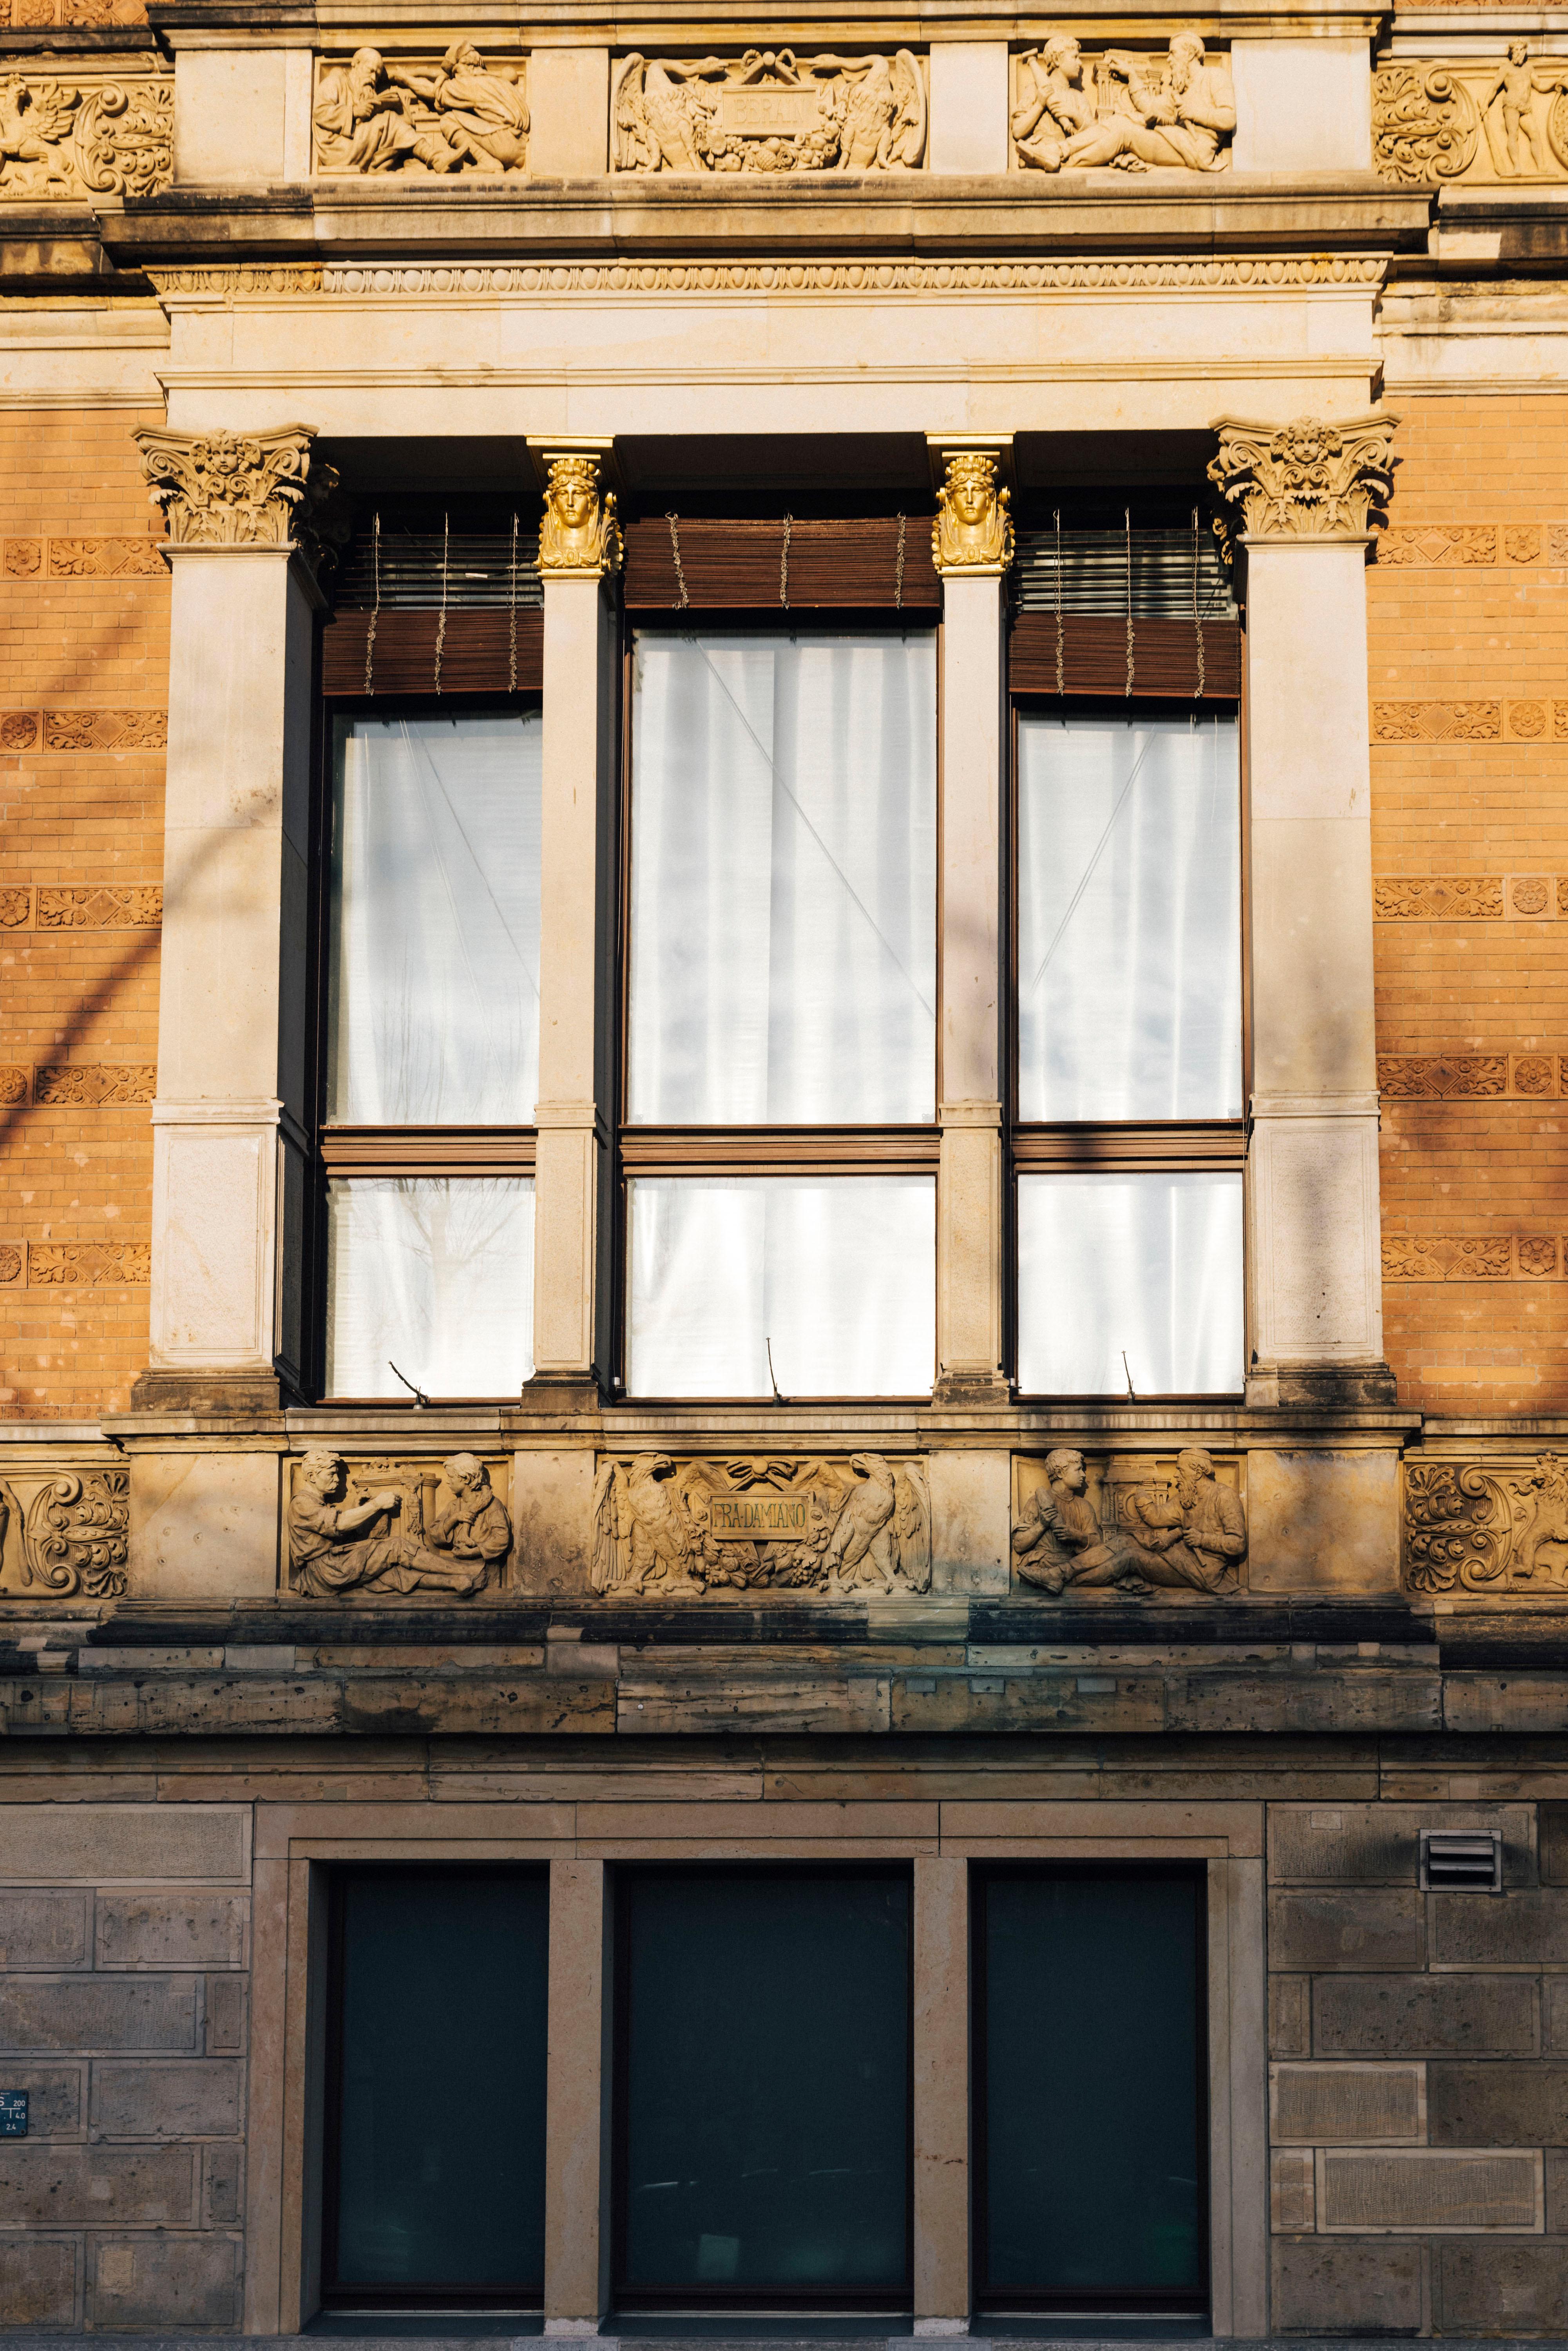 Frontal view of a window of the Gropius Bau building. Drawn white curtains can be seen.